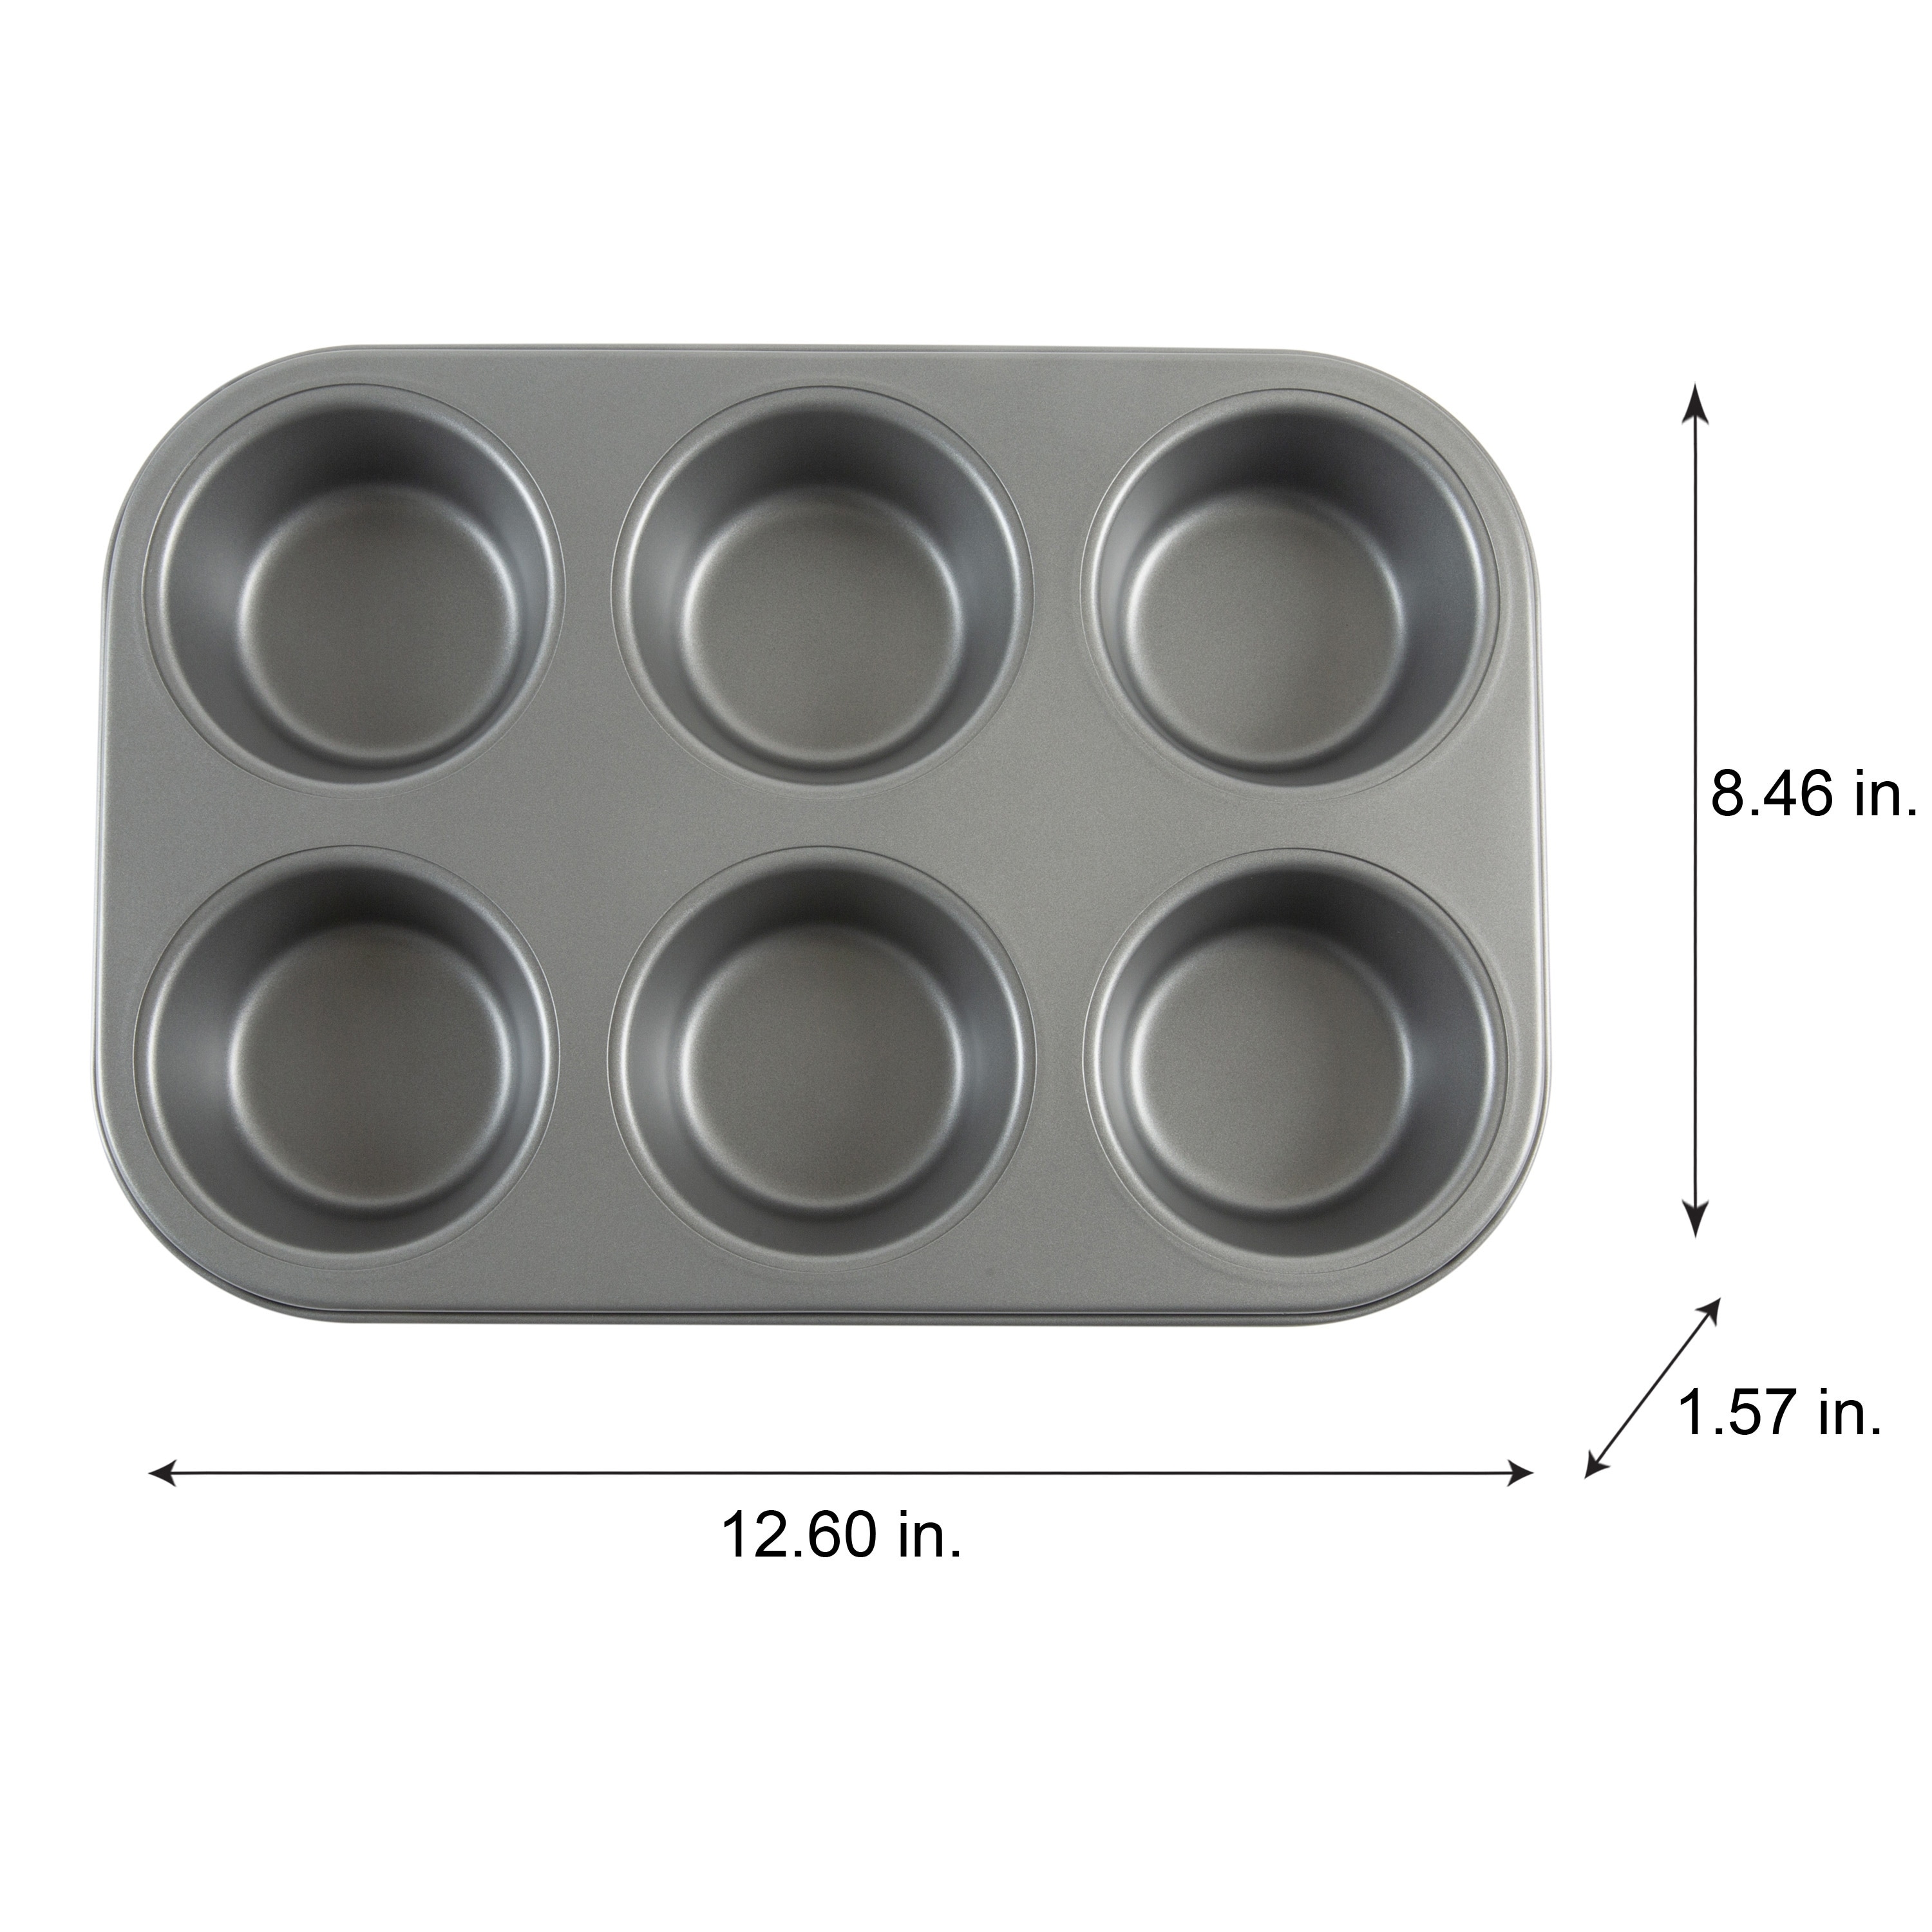 https://ak1.ostkcdn.com/images/products/is/images/direct/4baeed0785a0af364d72782115a6cc8b93a3ea30/Kitchen-Details-6-Cup-Texas-Muffin-Pan.jpg